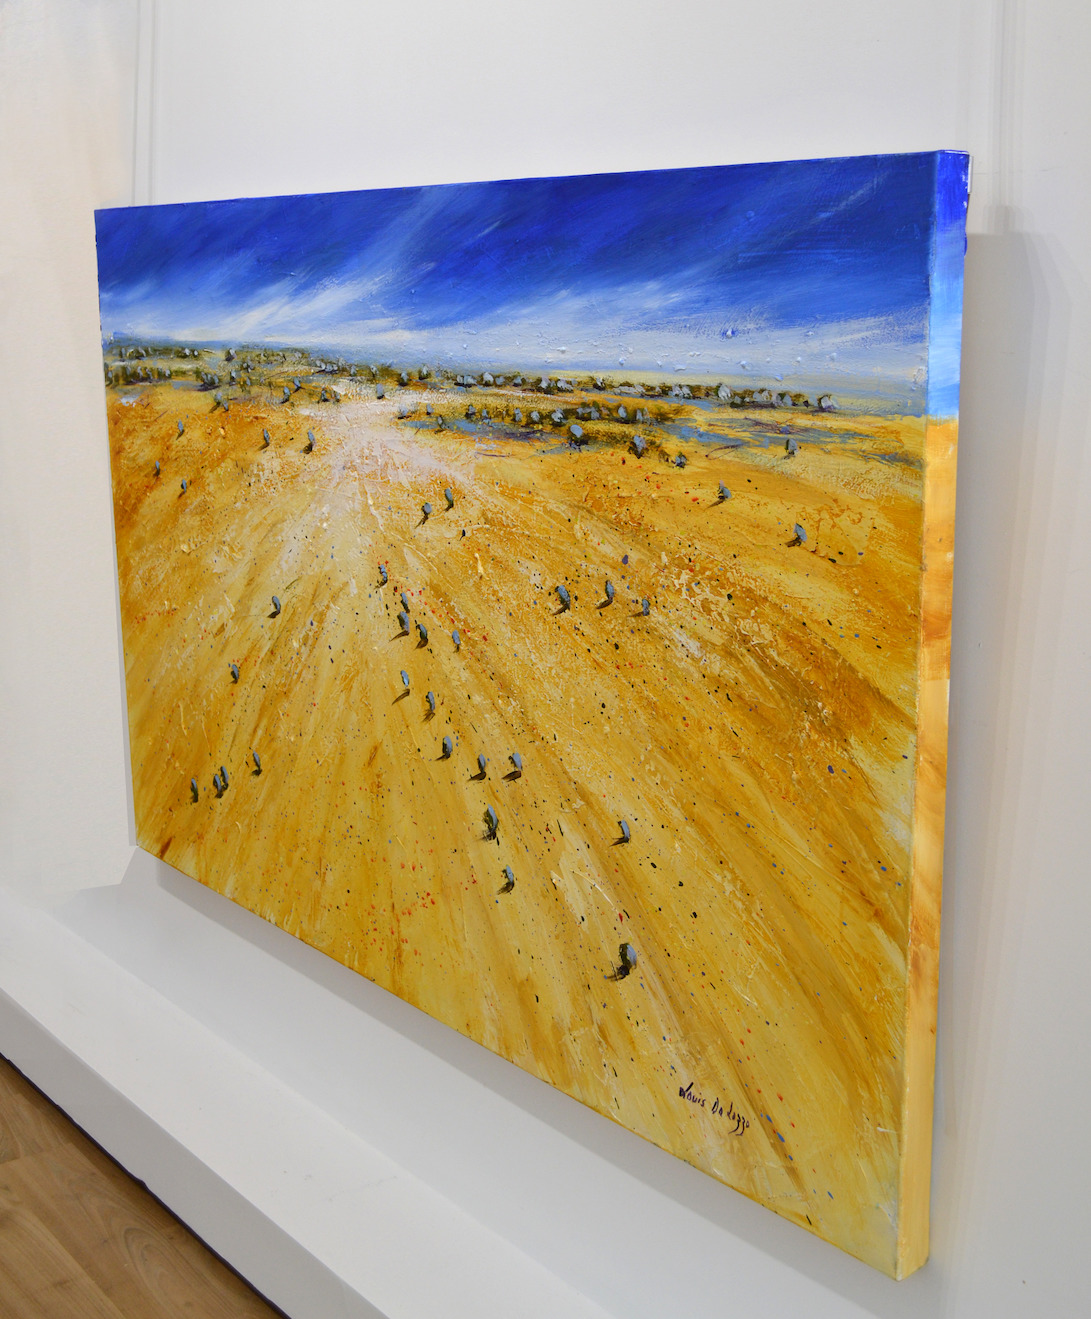 Side View Of Landscape Painting "Western Vista Charters Towers" By Louis Dalozzo